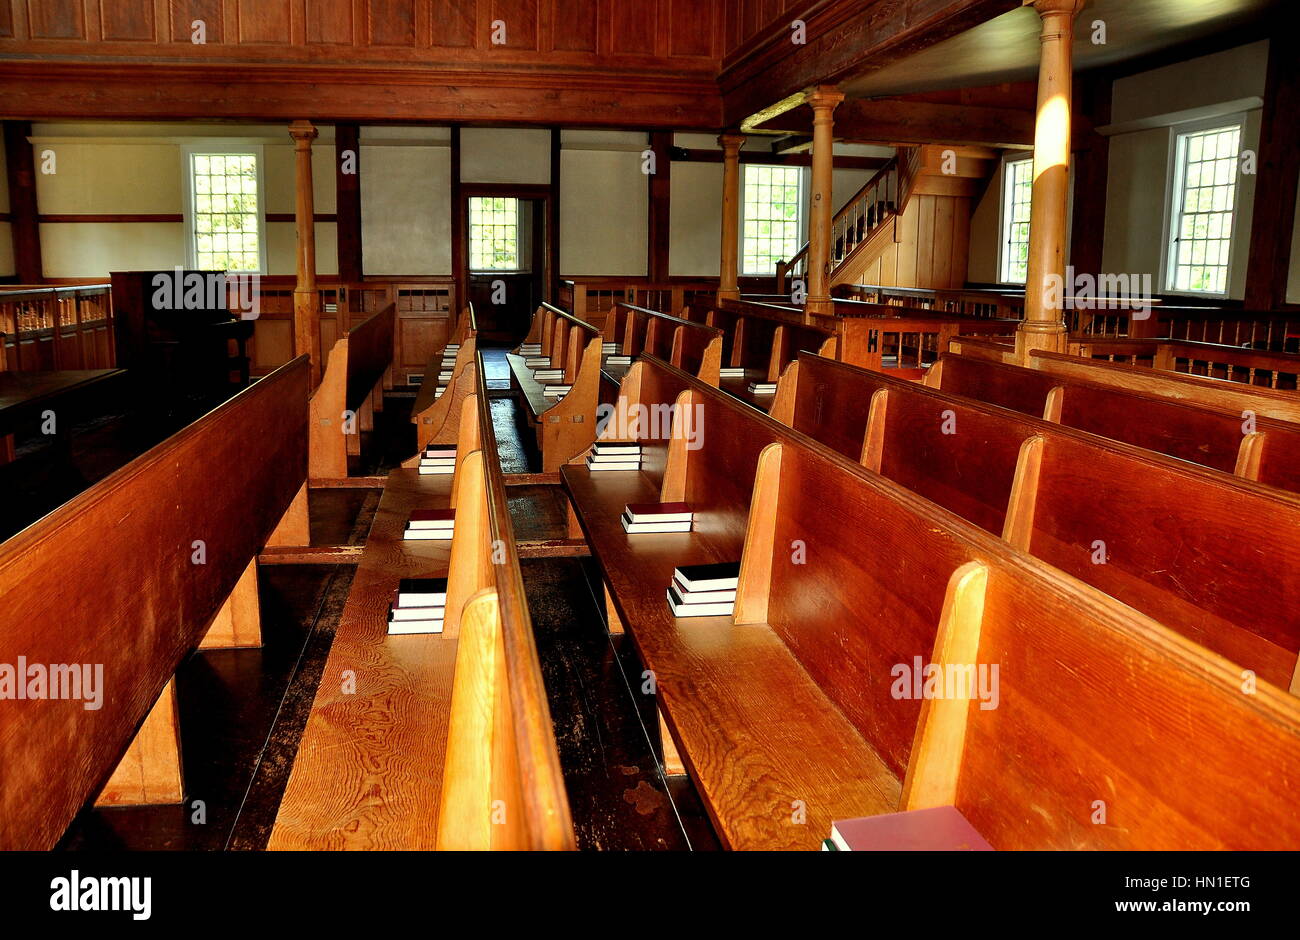 West Barnstable, Massachusetts  July 13, 2015-:  Wooden pews with prayer hymnals inside the historic 1717 West Barnstable Parish Meeting House Stock Photo